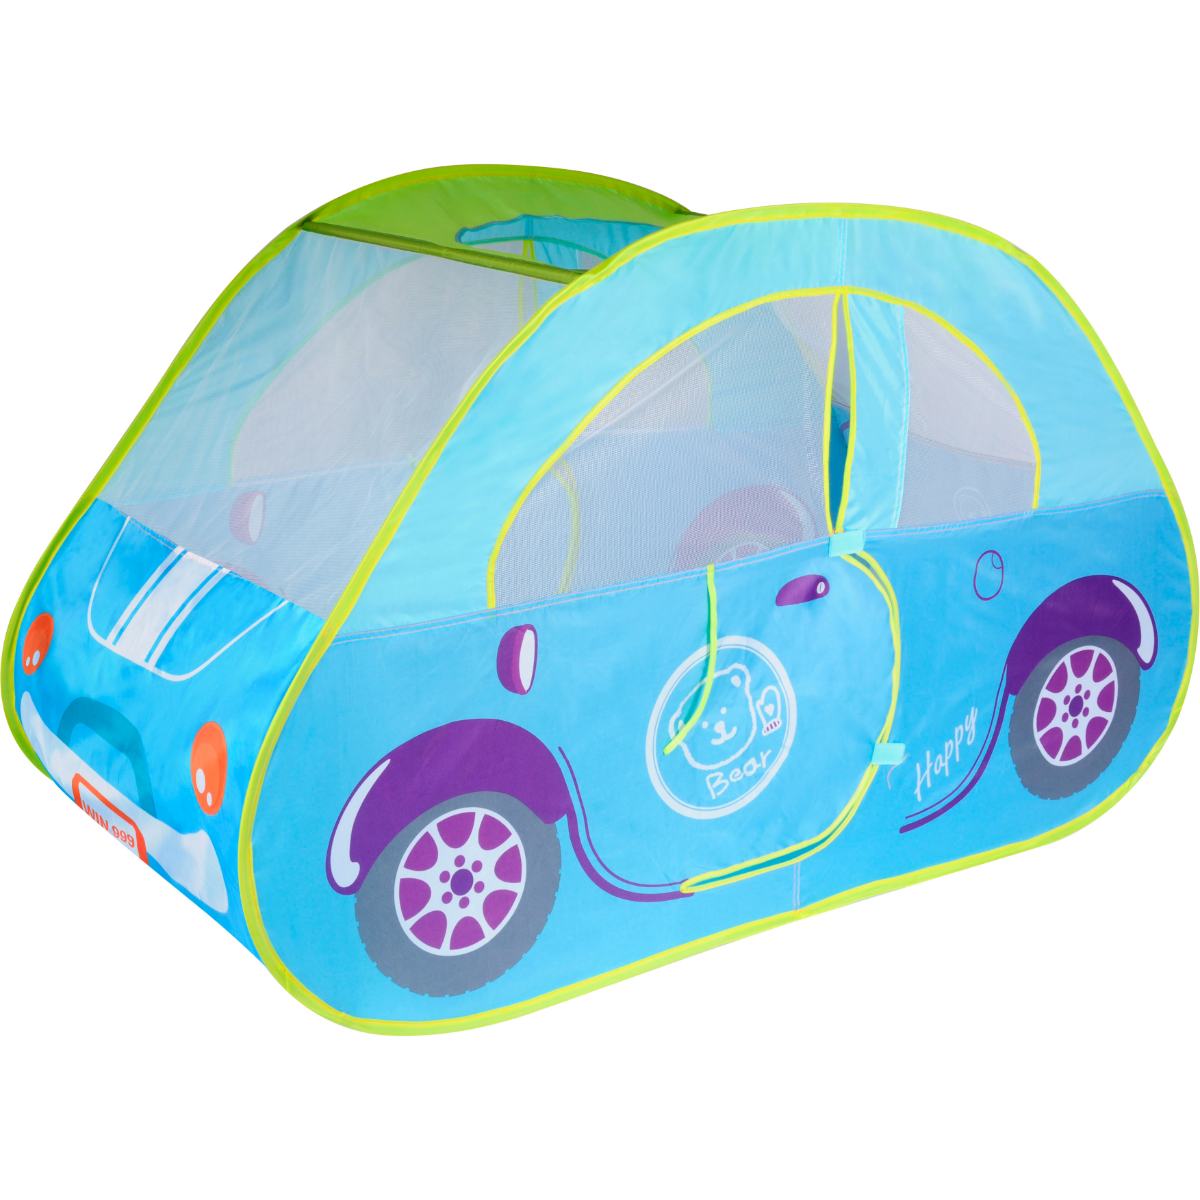 ching-ching-fashion-car-house-with-100pcs-colorful-balls